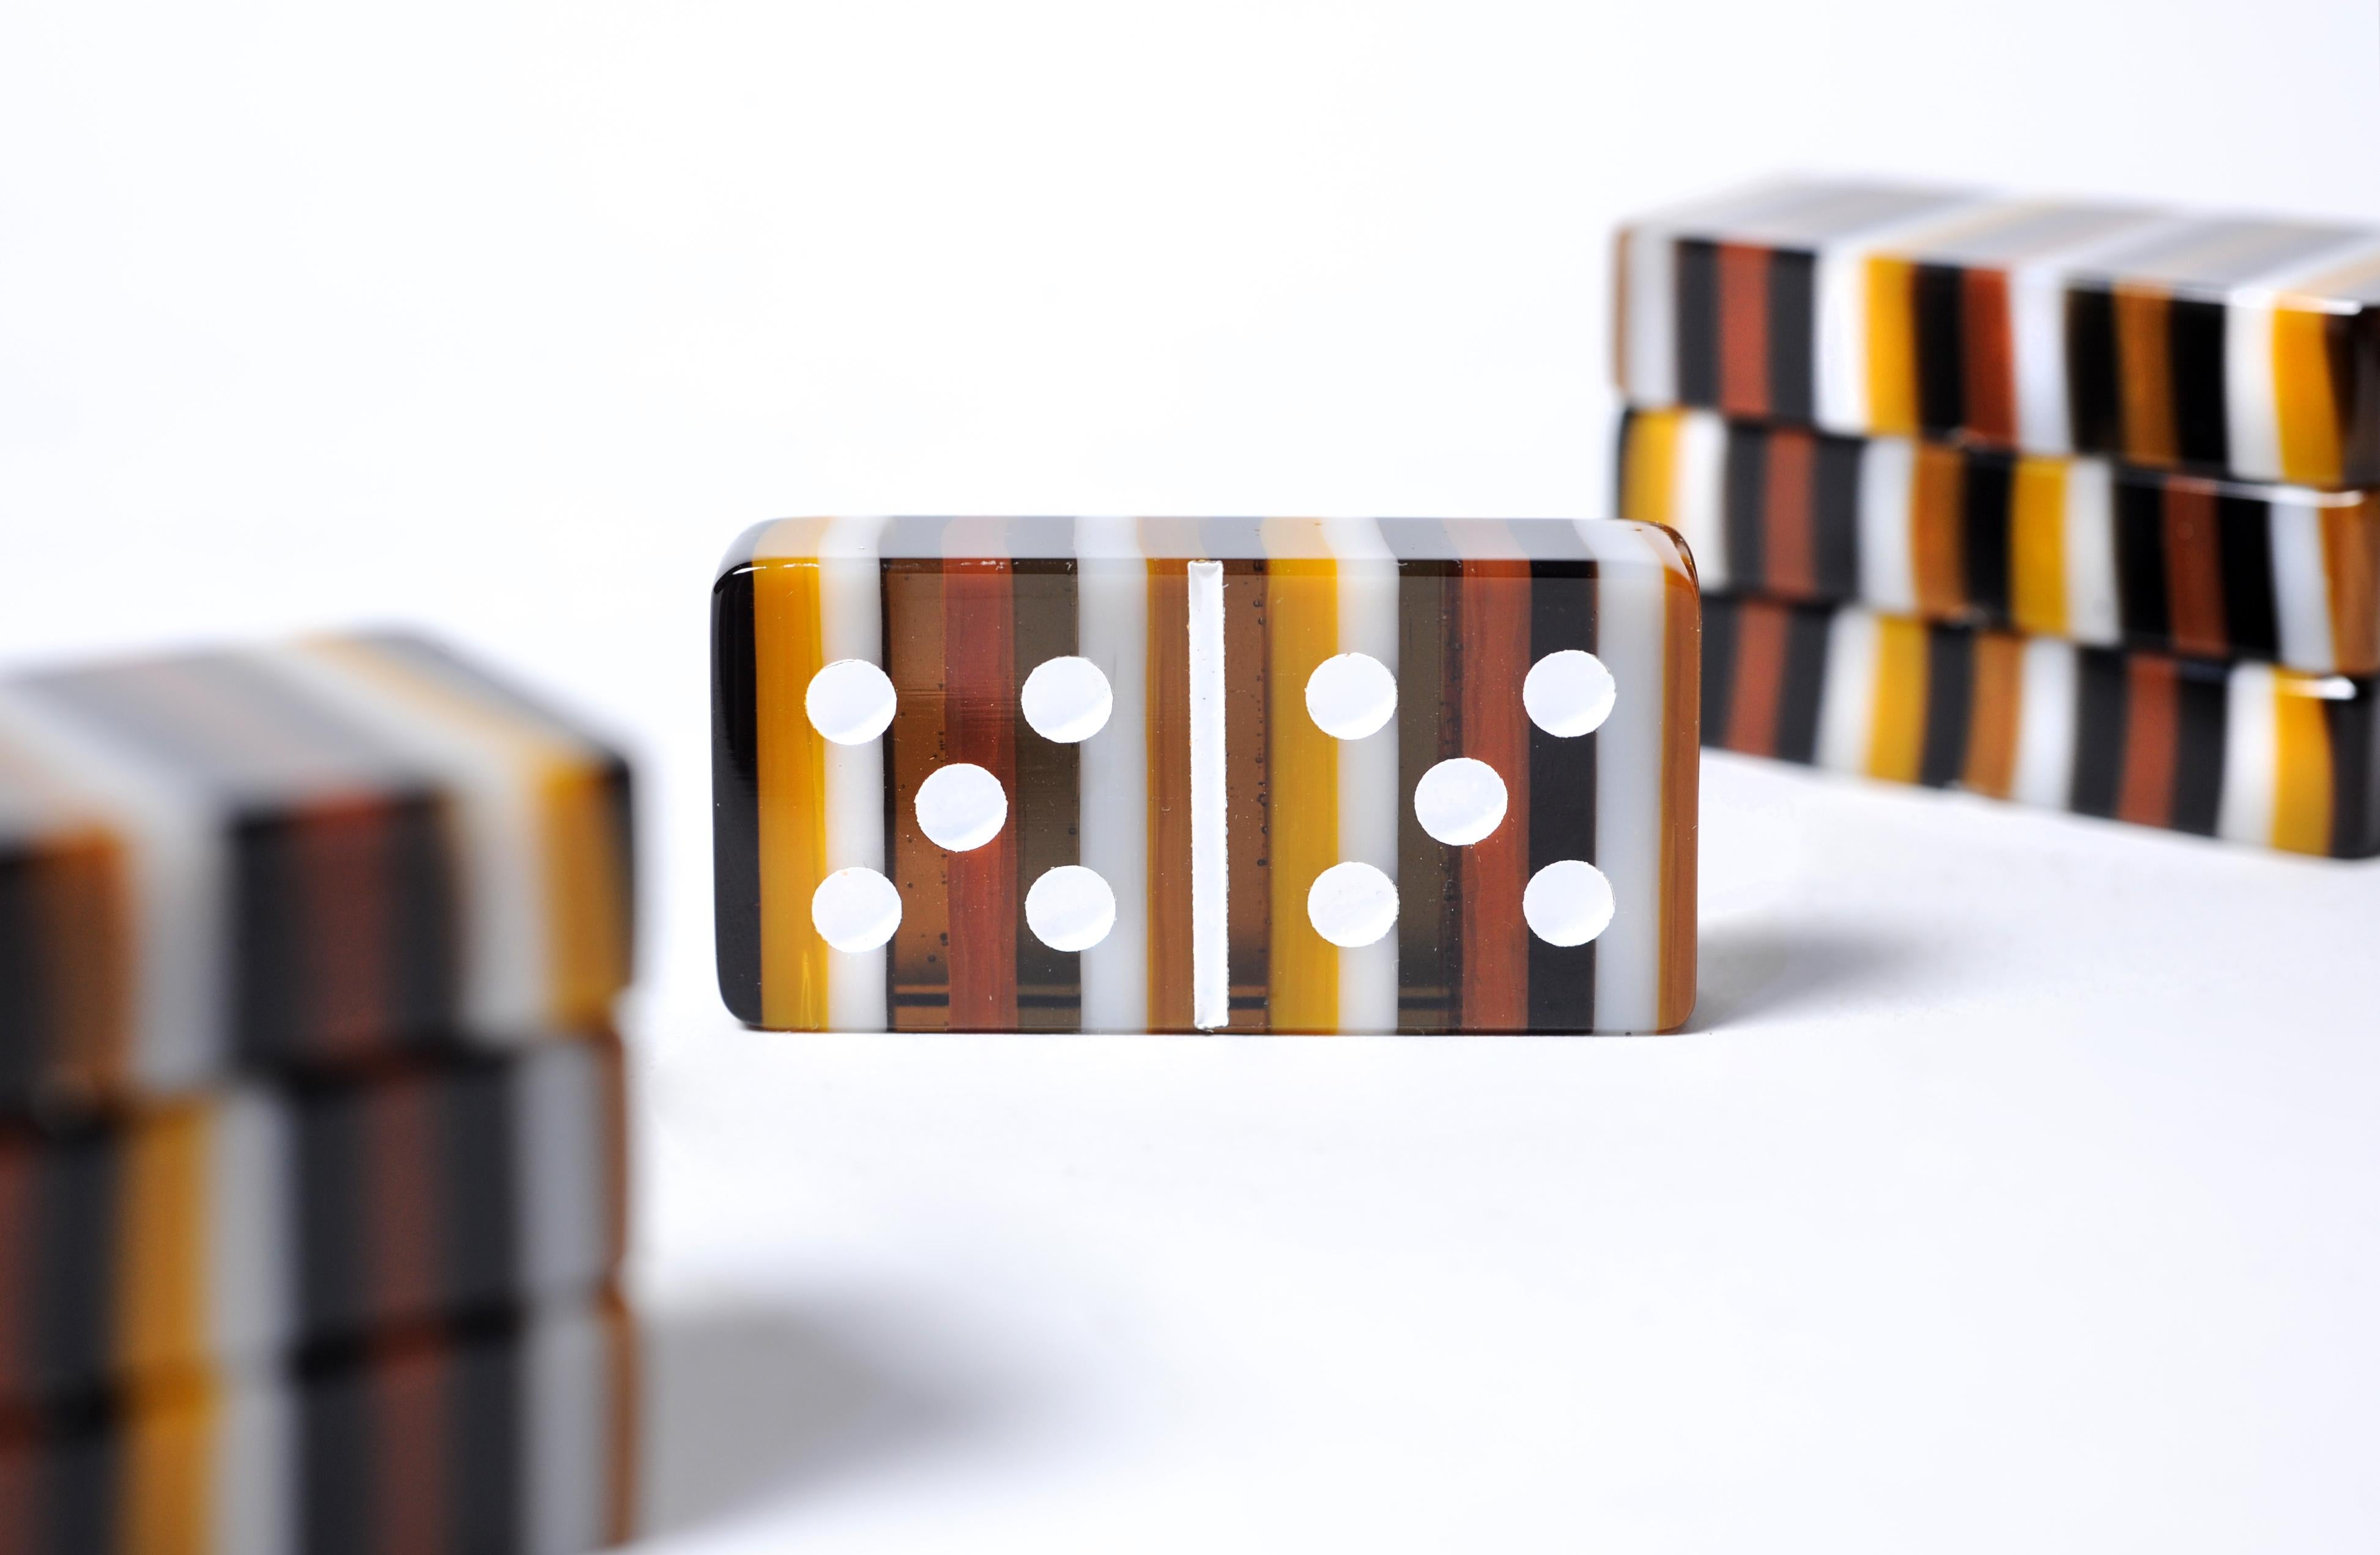 Domino is a true classic game about tactics and luck played around the globe.
Opening the case you’ll find a treasure of a 100% high quality crystal worked by Orfeo Quagliata’s artisans.

Orfeo takes his most interesting glass techniques to apply